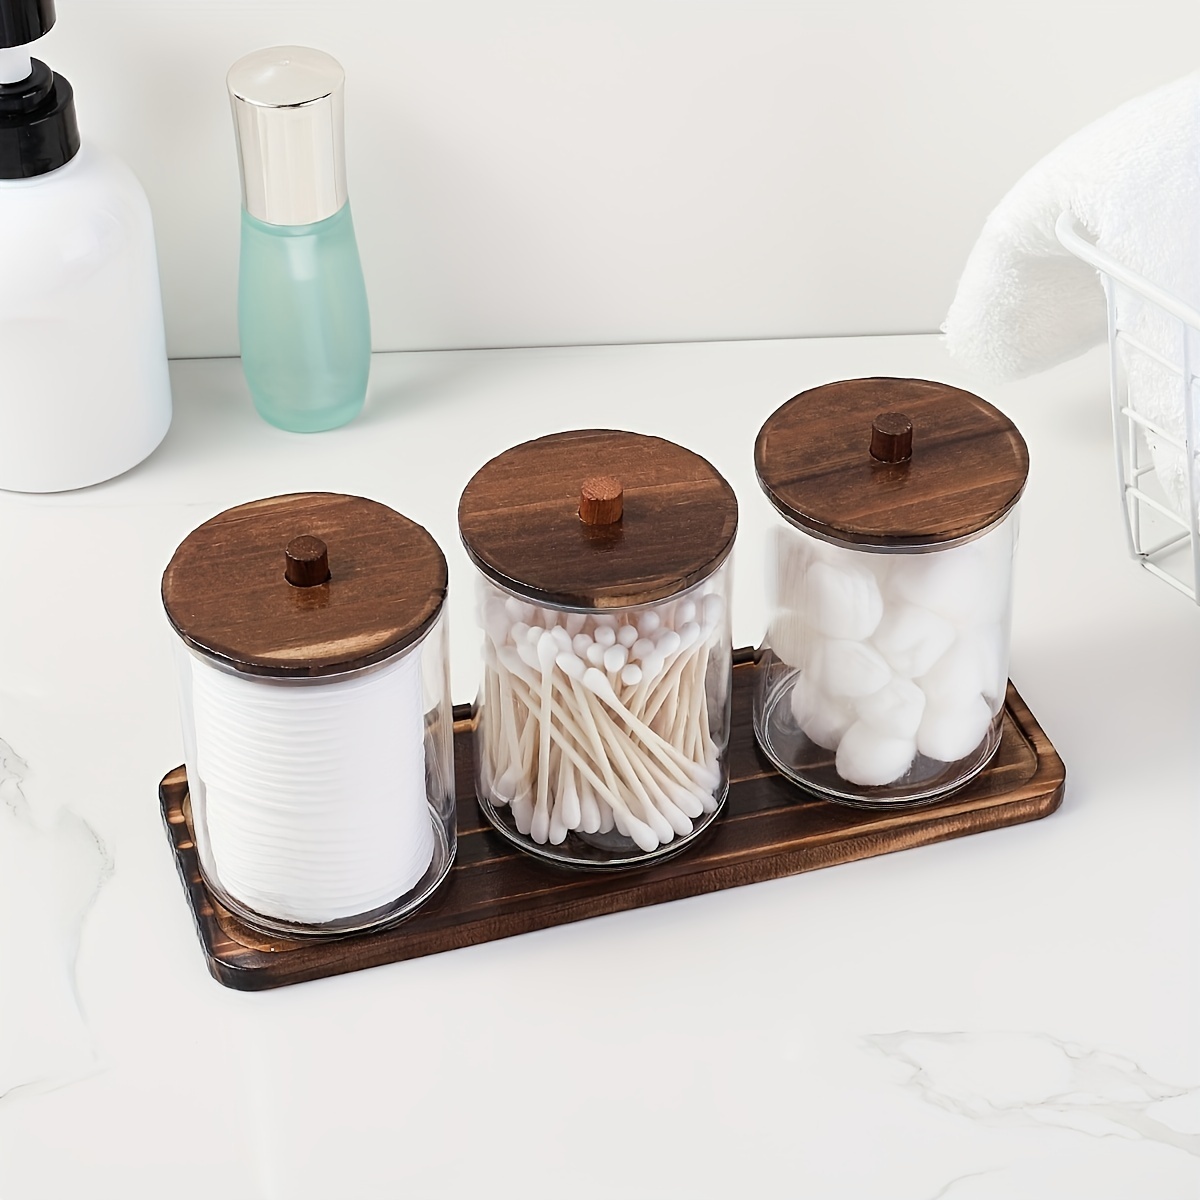 3pcs Cotton Swab Holder Dispenser With 1pc Tray, Retro 10 Oz Bathroom  Organizers And Storage Containers, Clear Plastic Apothecary Jars With Wood  Lids